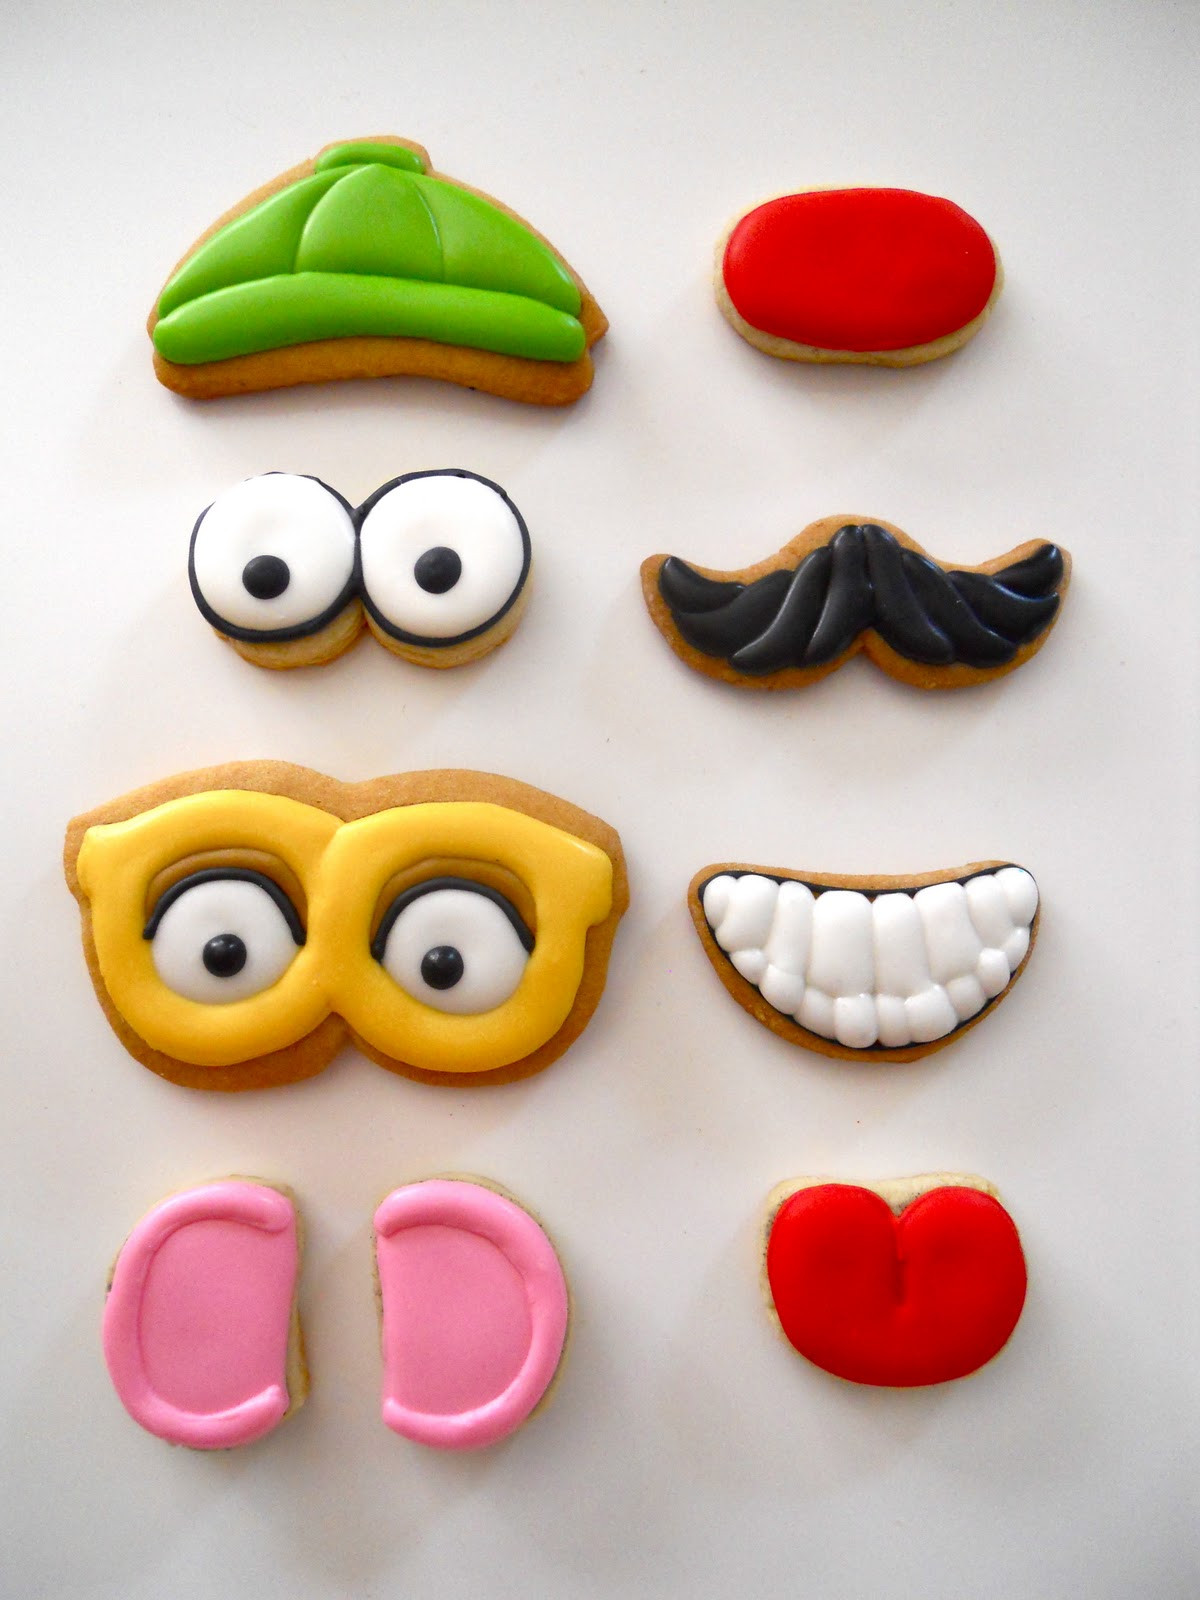 Mr Potato Head Parts
 Oh Sugar Events Play With Your Food Mr Potato Head